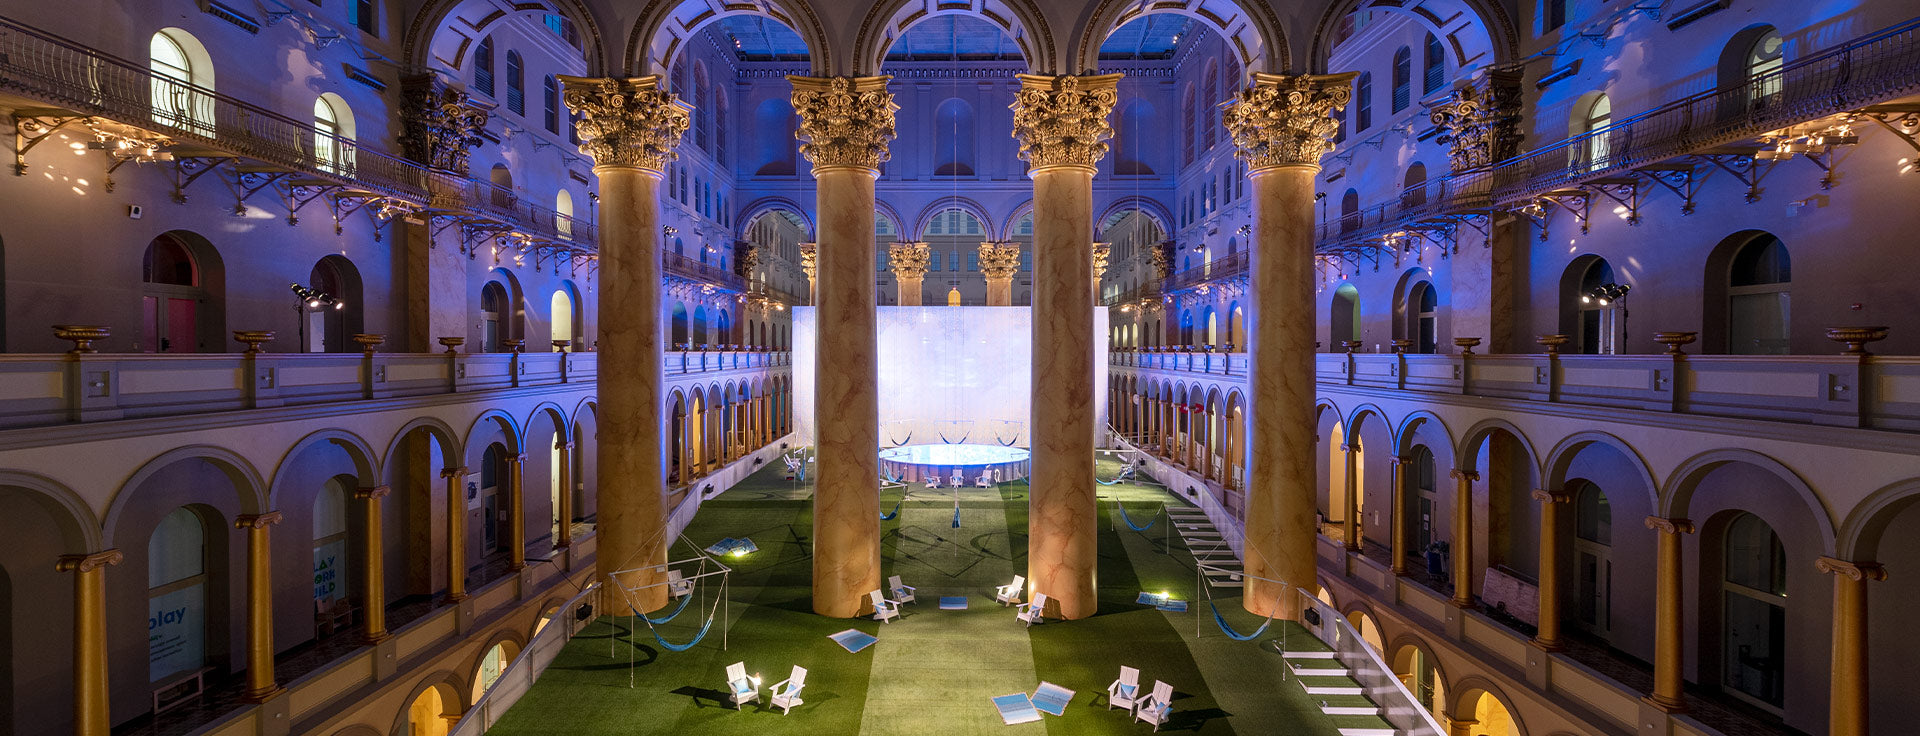 Lawn at the National Building Museum